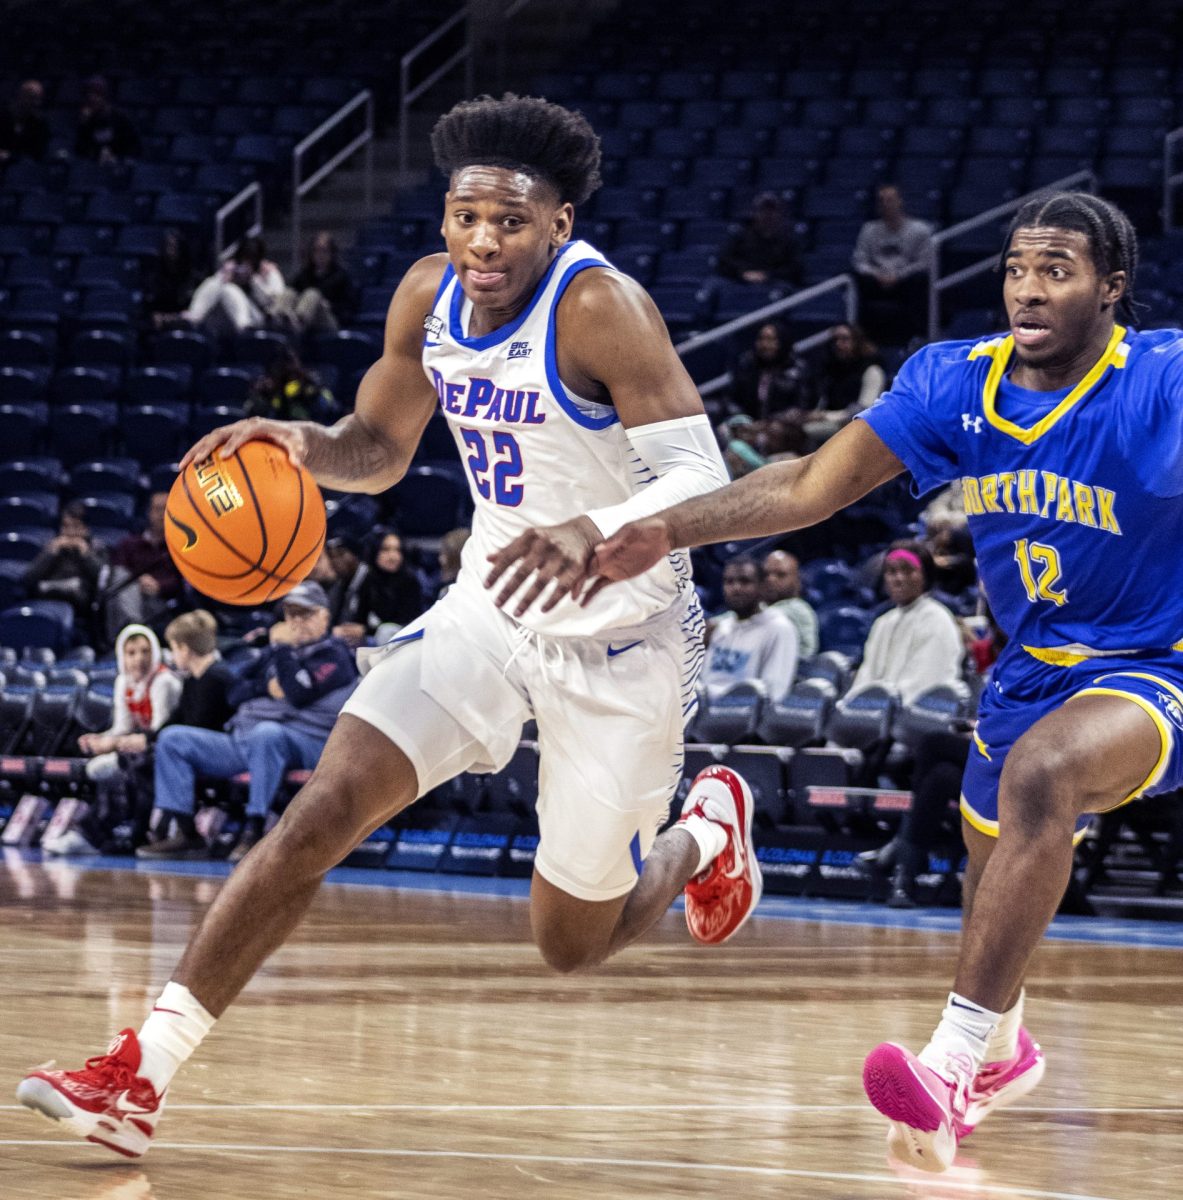 Sophomore guard Elijah Fisher drives to the basket in a exhibition game against North Park Thursday, November 2 at Wintrust Arena.